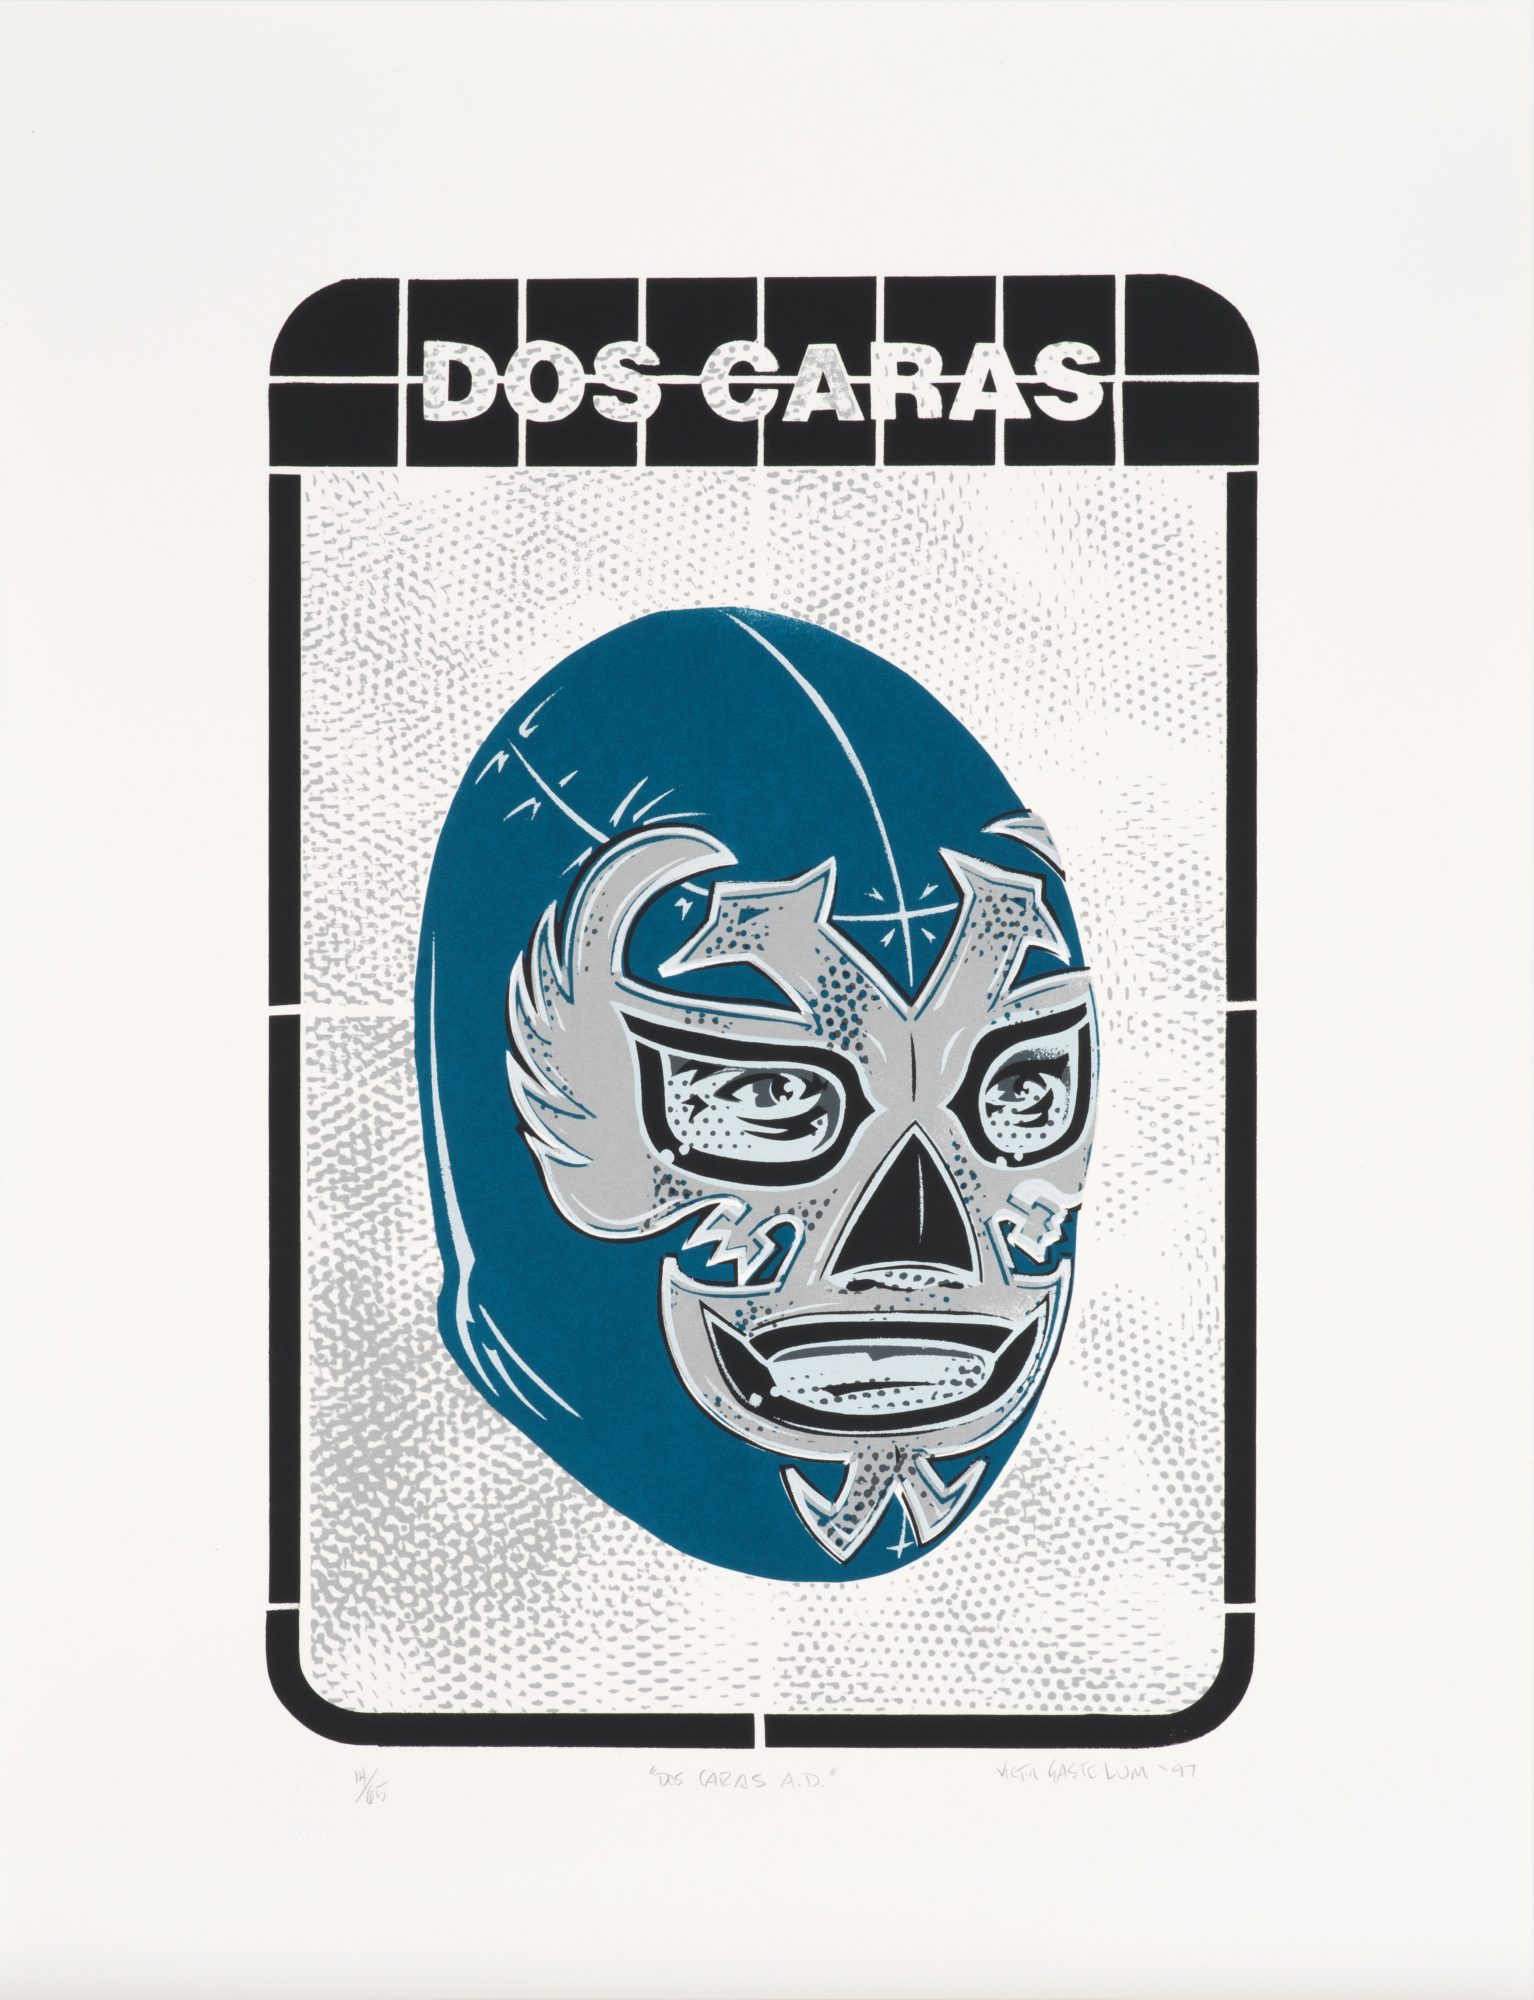 Screenprint featuring luchador Dos Caras wearing a blue and grey mask.